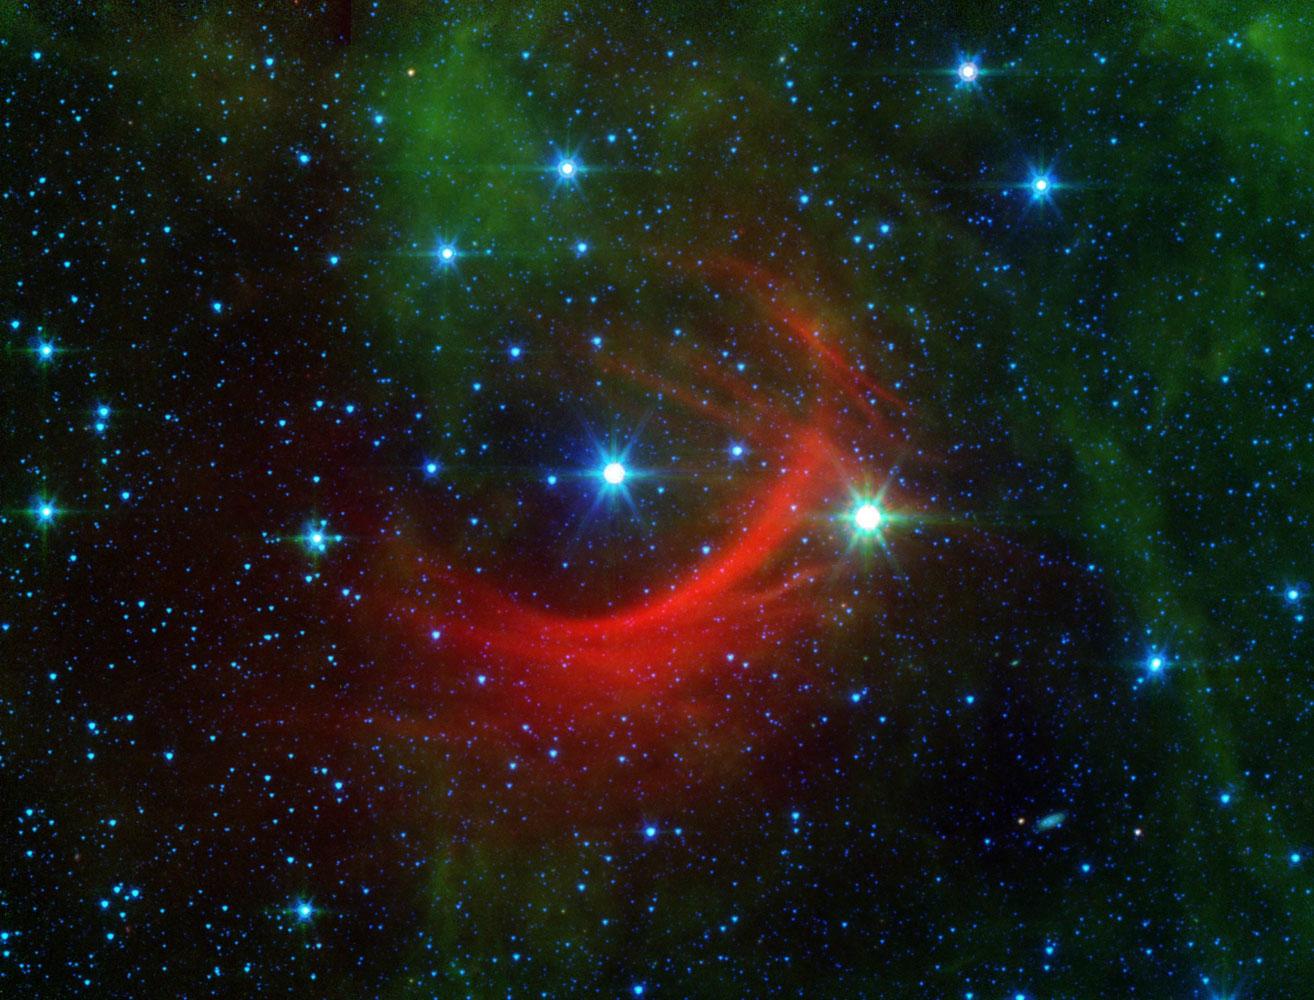 The Kappa Cassiopeiae star, or the HD 2905, taken from NASA's Spitzer Space Telescope (SST), released on Feb. 22, 2014. Kappa Cassiopeiae is a massive, hot supergiant moving at around 2.5 million mph relative to its neighbors (1,100 km per second). The surrounding red streaks of material in its path are called bow shocks, and they can often be seen in front of the fastest, most massive stars in the galaxy.